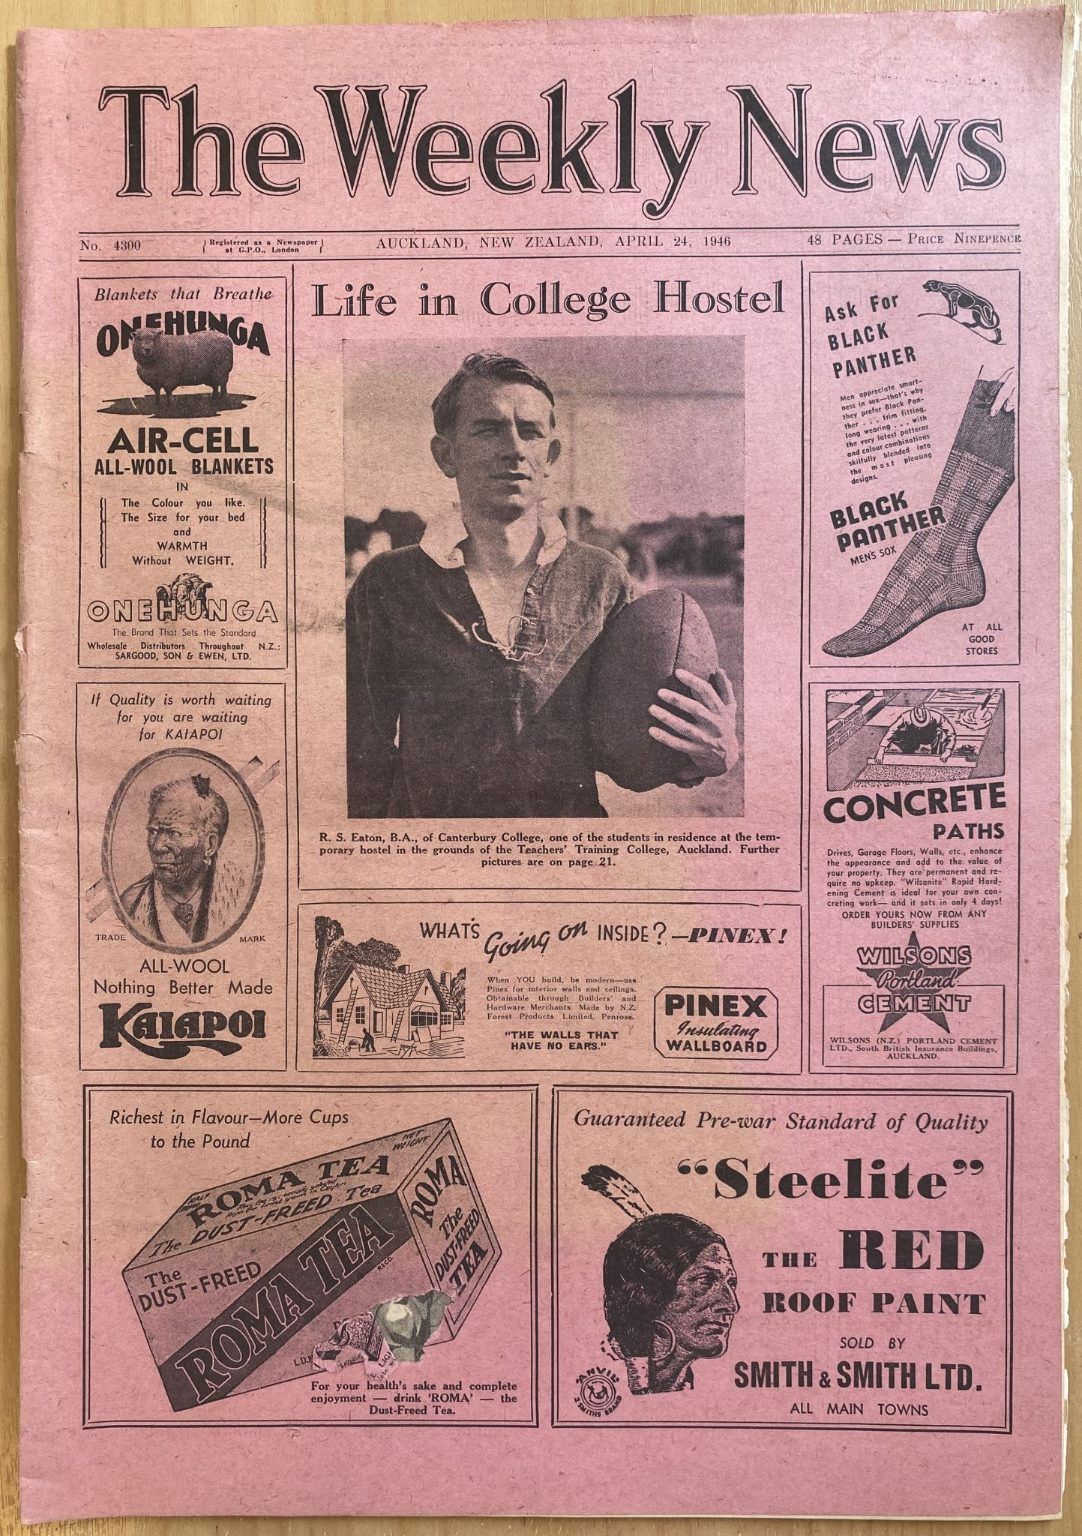 OLD NEWSPAPER: The Weekly News - No. 4300, 24 April 1946